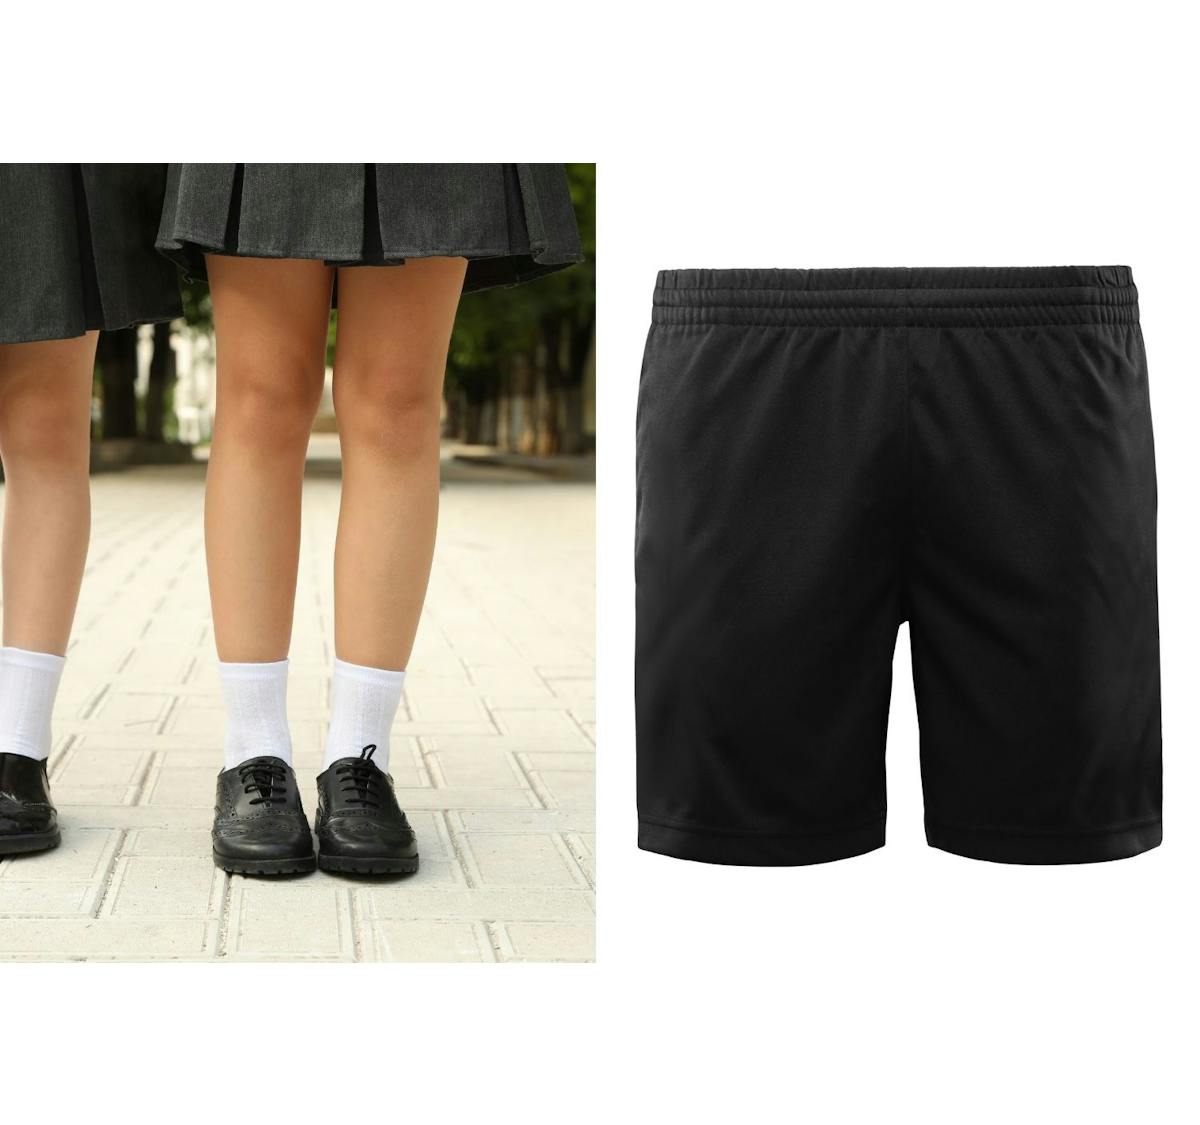 Mixed Reaction From Parents As School Introduces 'Modesty Shorts